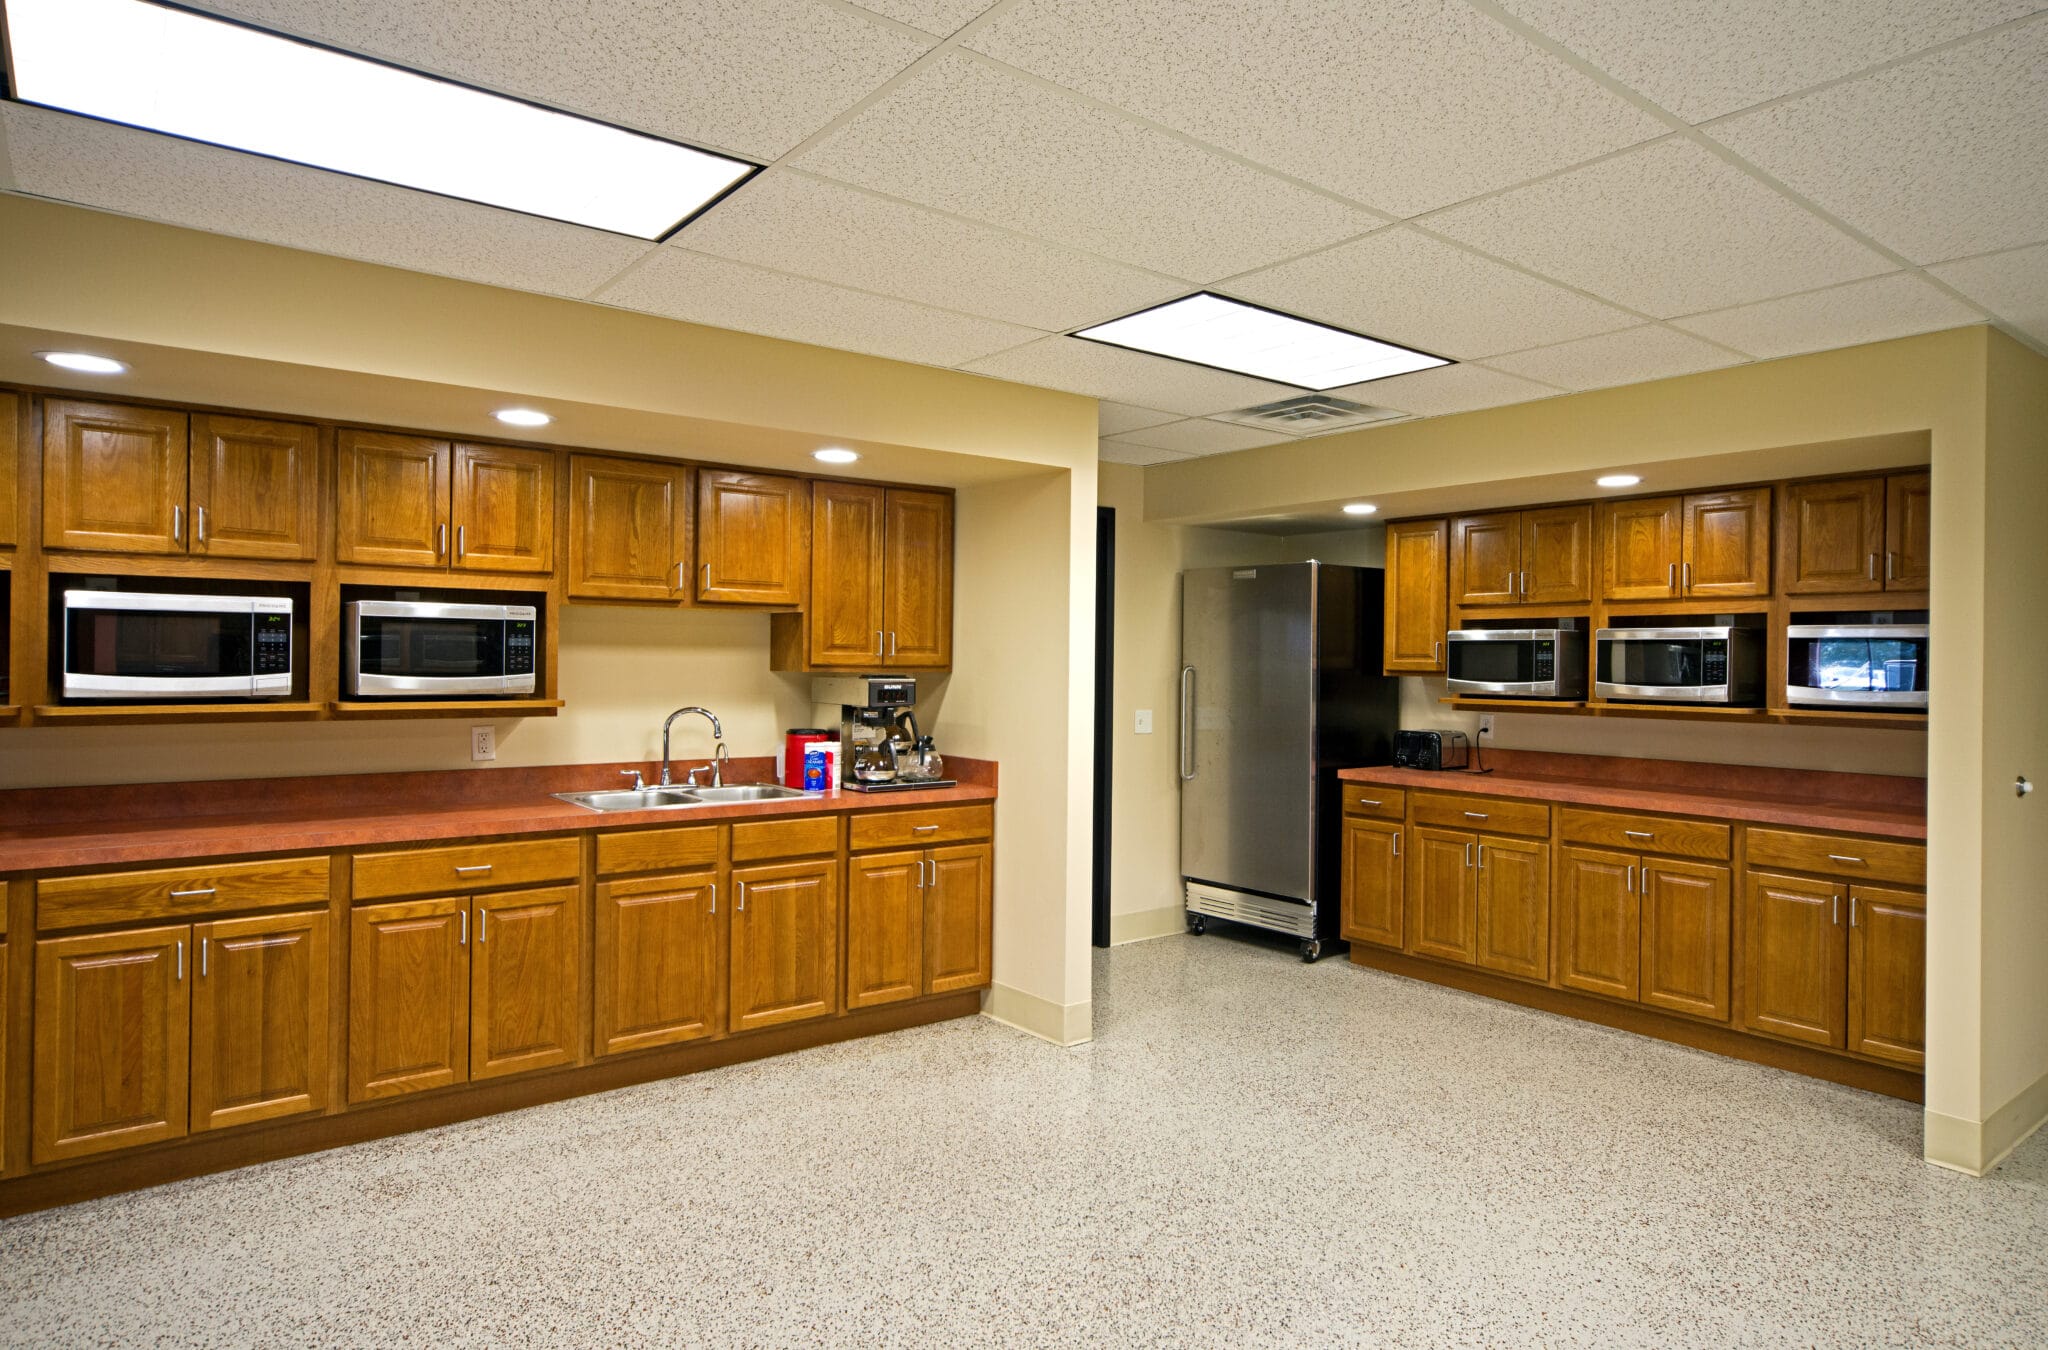 large office kitchen with multiple microwaves and ample cabinetry